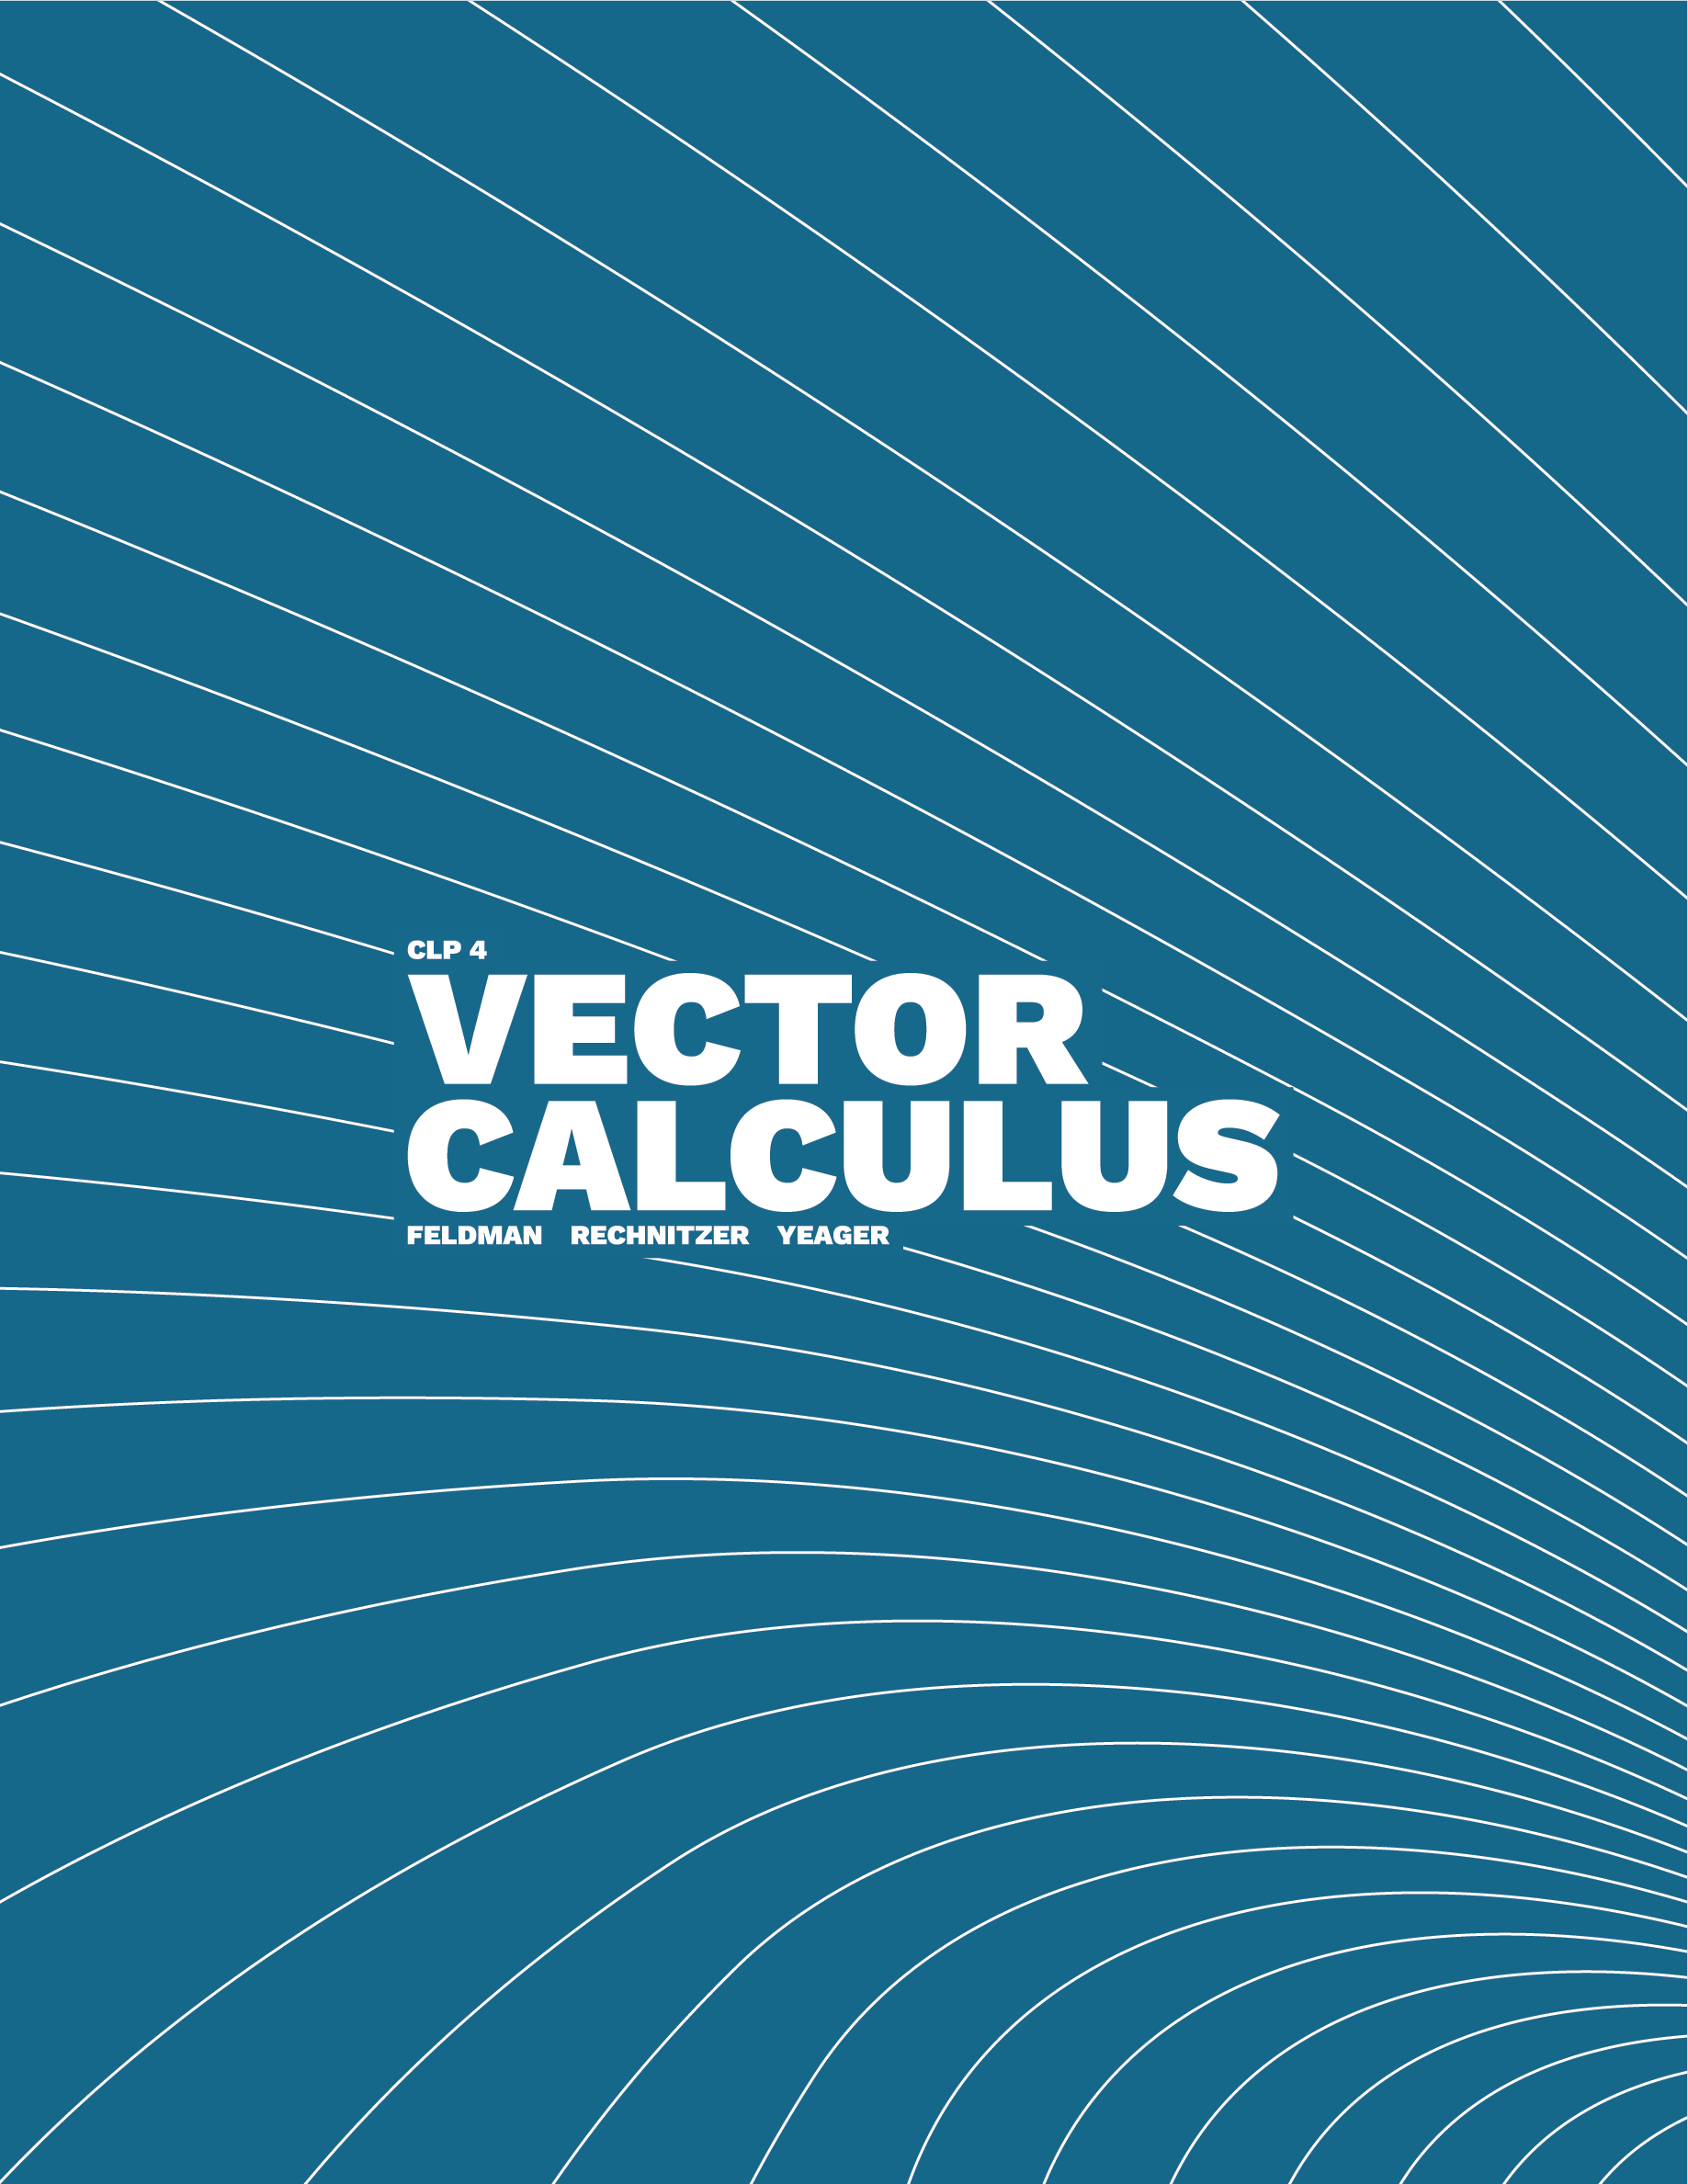 Vector Calculus textbook cover